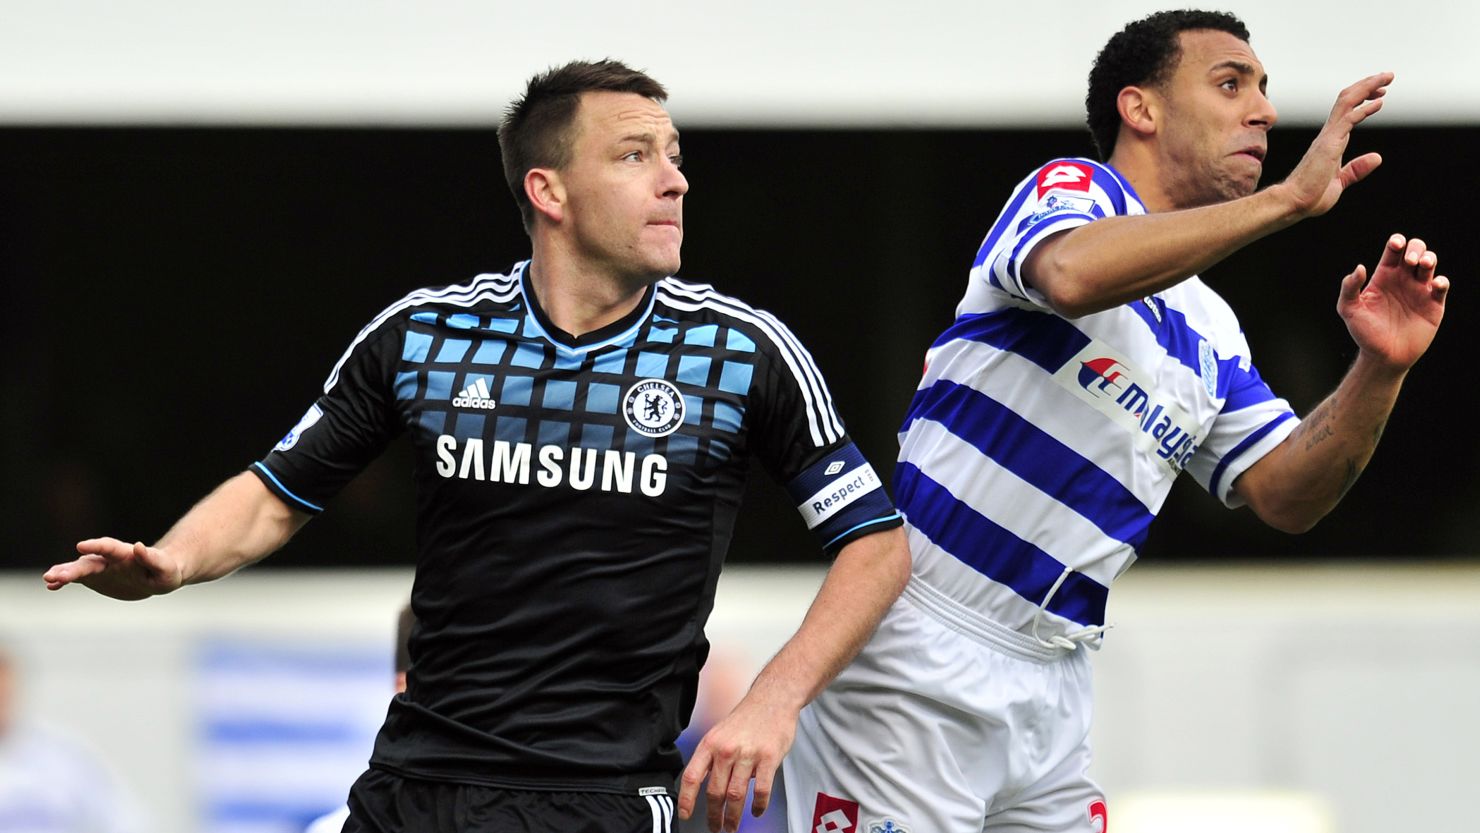 Chelsea's John Terry (left) and Anton Ferdinand of Queens Park Rangers compete during an FA Cup tie in January 2012 